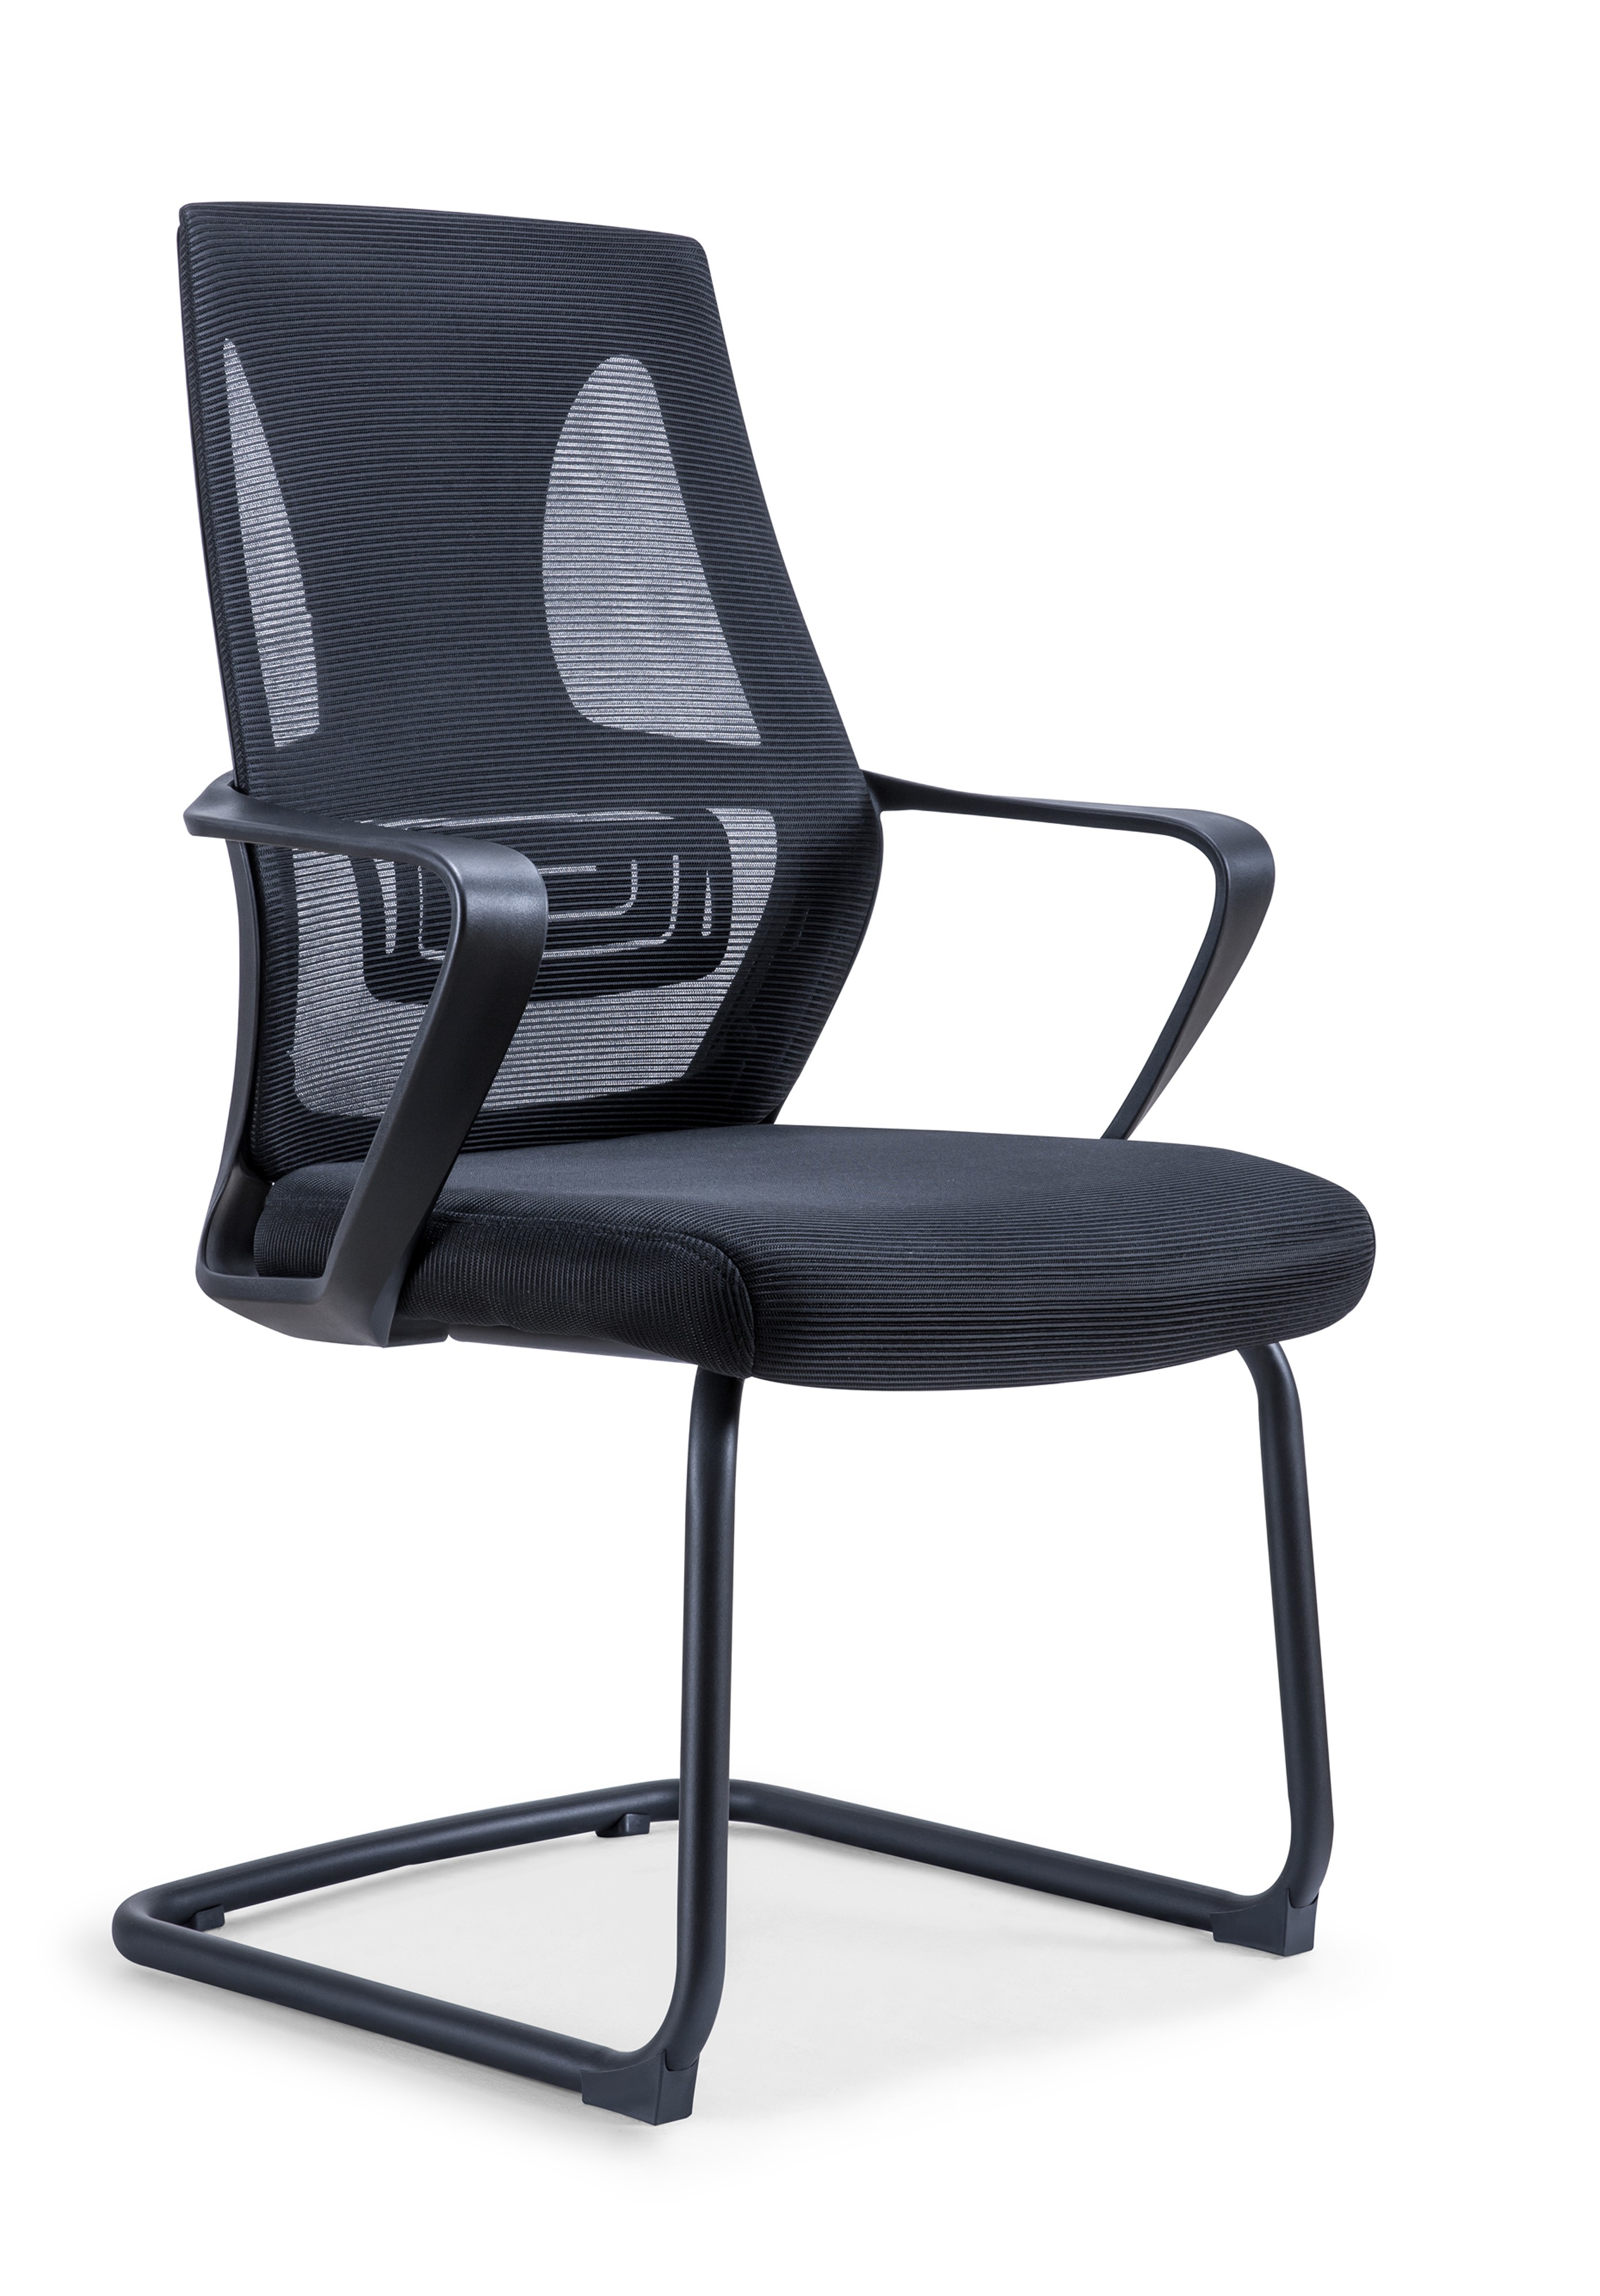 Newcity 544C High Quality Office Furniture Commercial Meeting Room Modern Work Office Mesh Chair Waiting Room Guest Visitor Chair Supplier Foshan China